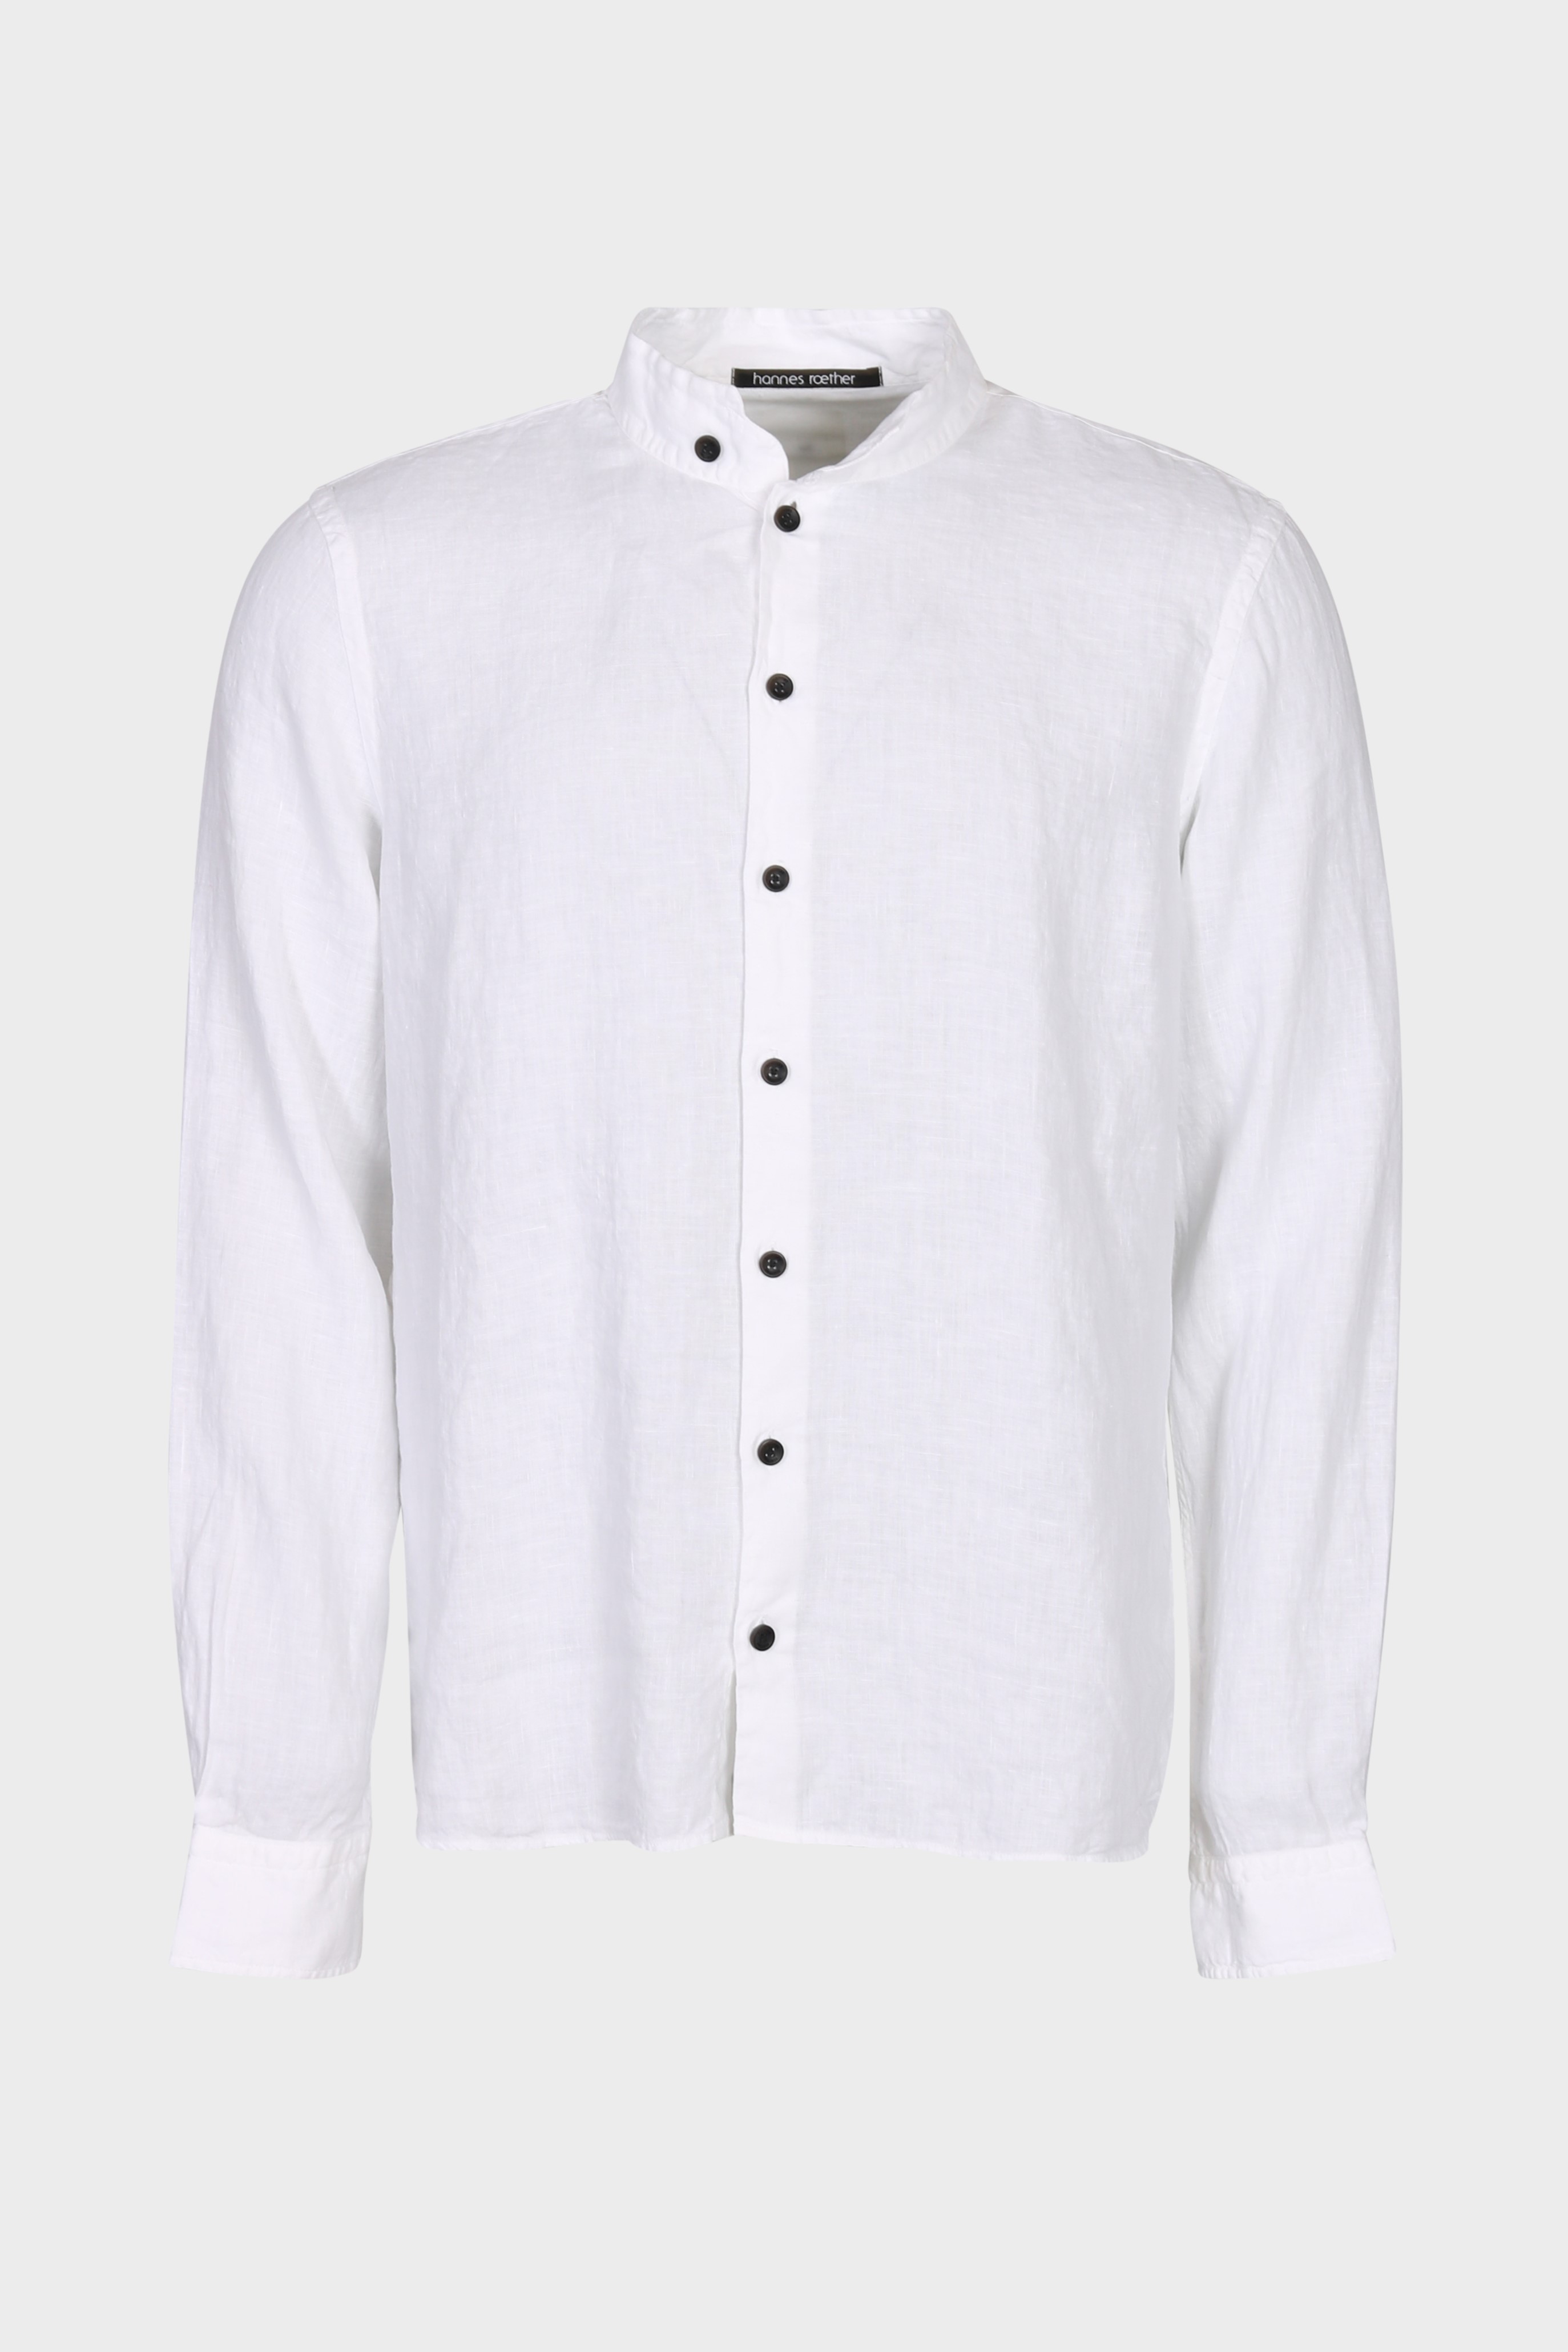 HANNES ROETHER Linen Shirt in White XL